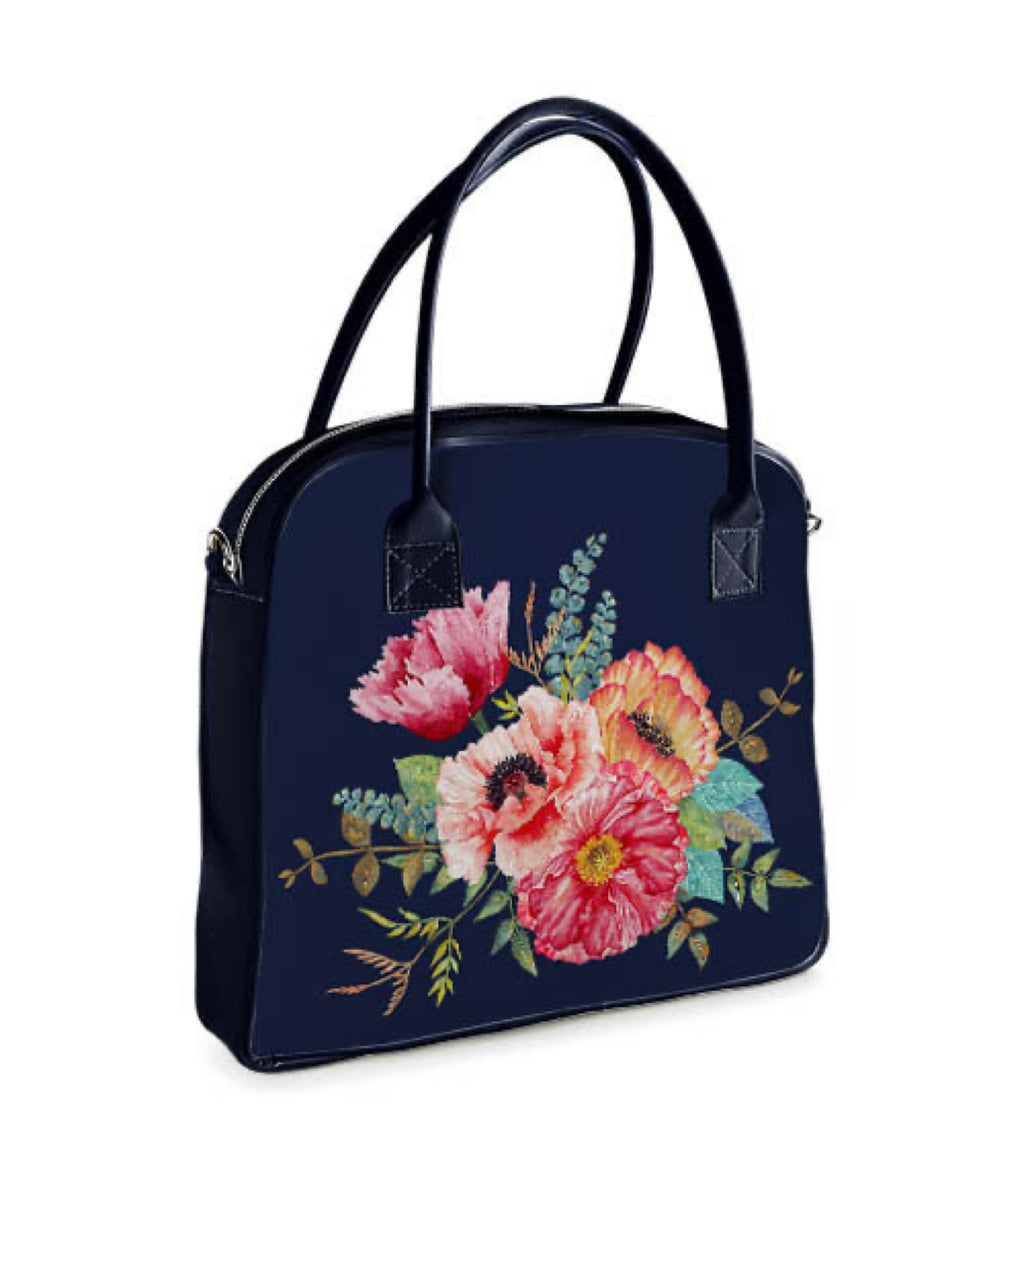 Large Purse “Colourful Poppies”